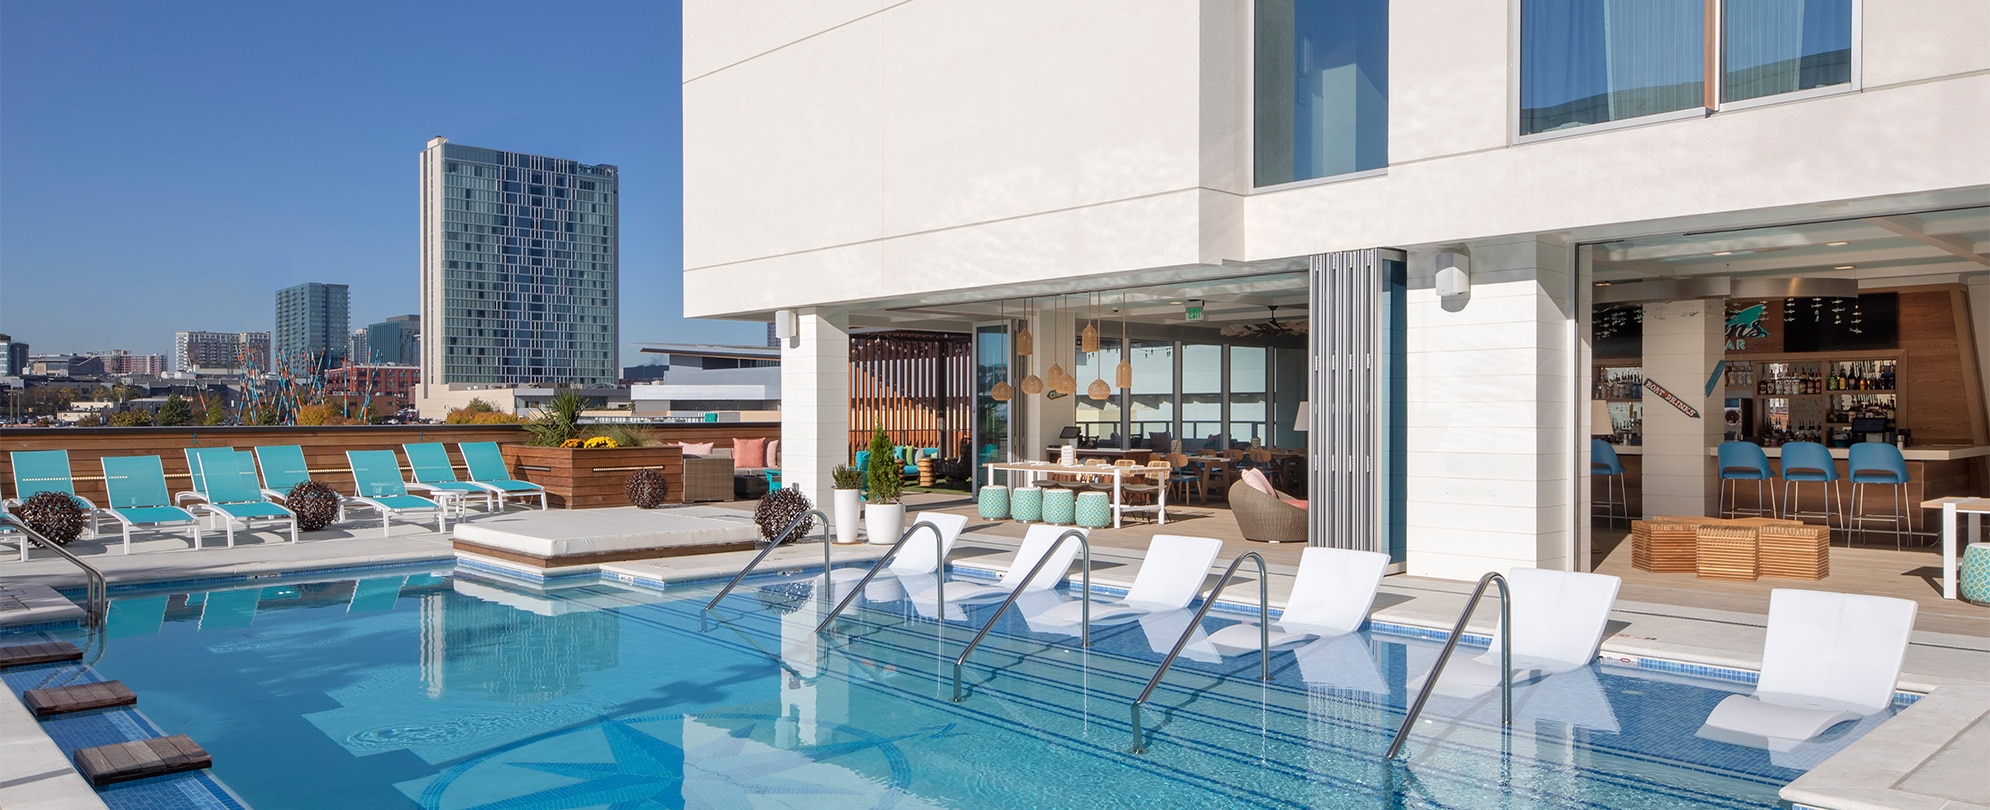 The rooftop pool area at Margaritaville Vacation Club by Wyndham – Nashville, TN resort. 